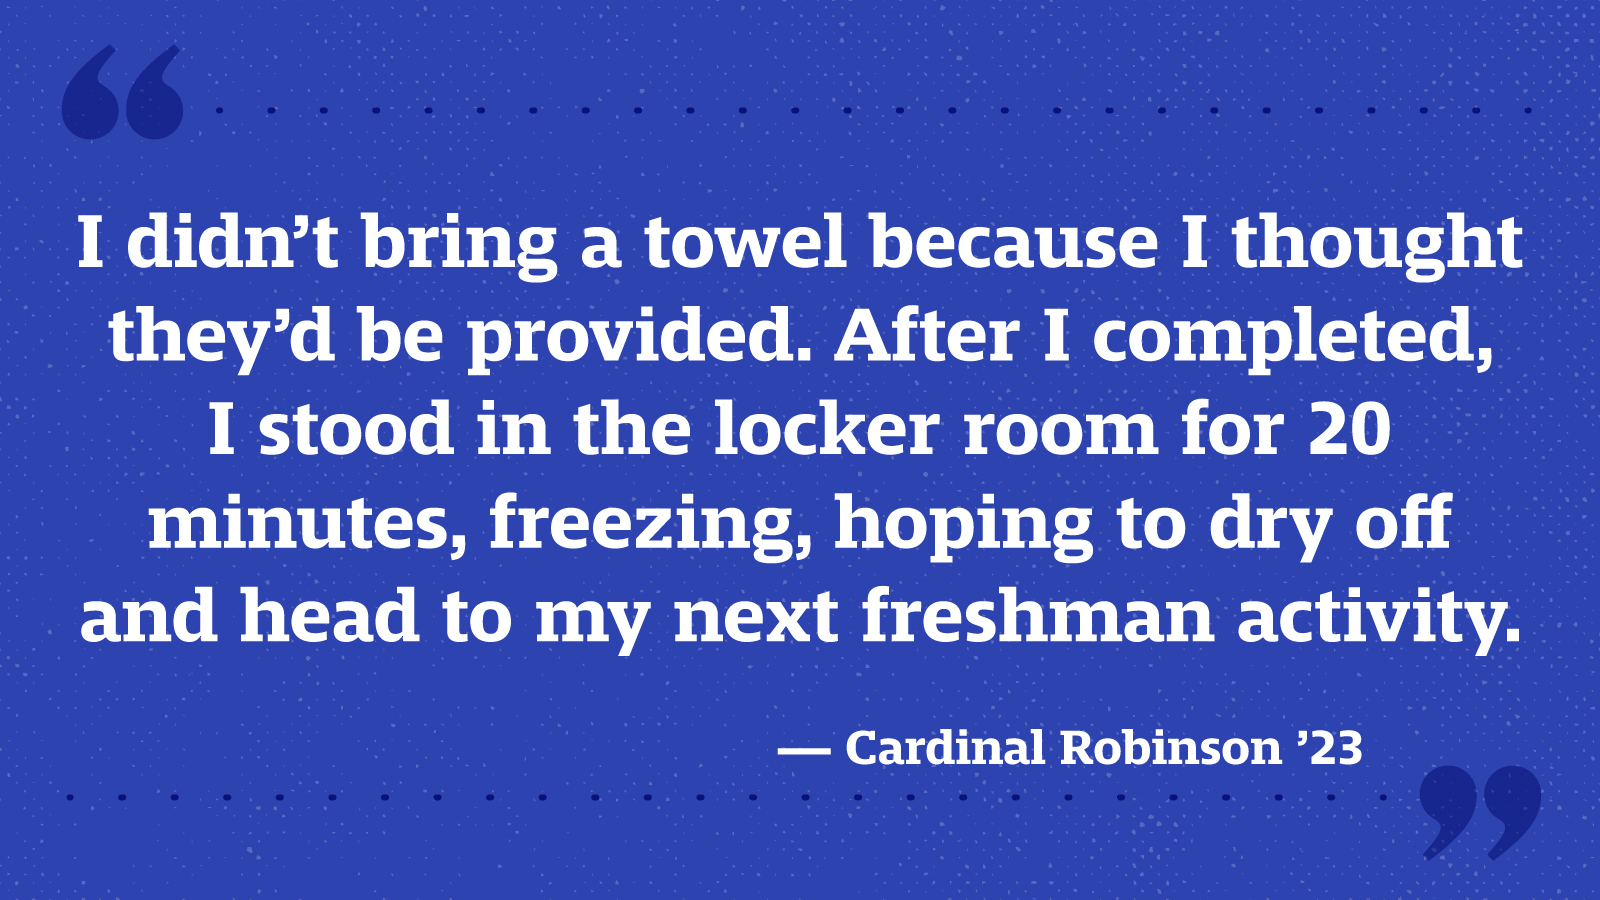 I didn’t bring a towel because I thought they’d be provided. After I completed, I stood in the locker room for 20 minutes, freezing, hoping to dry off and head to my next freshman activity. — Cardinal Robinson ’23